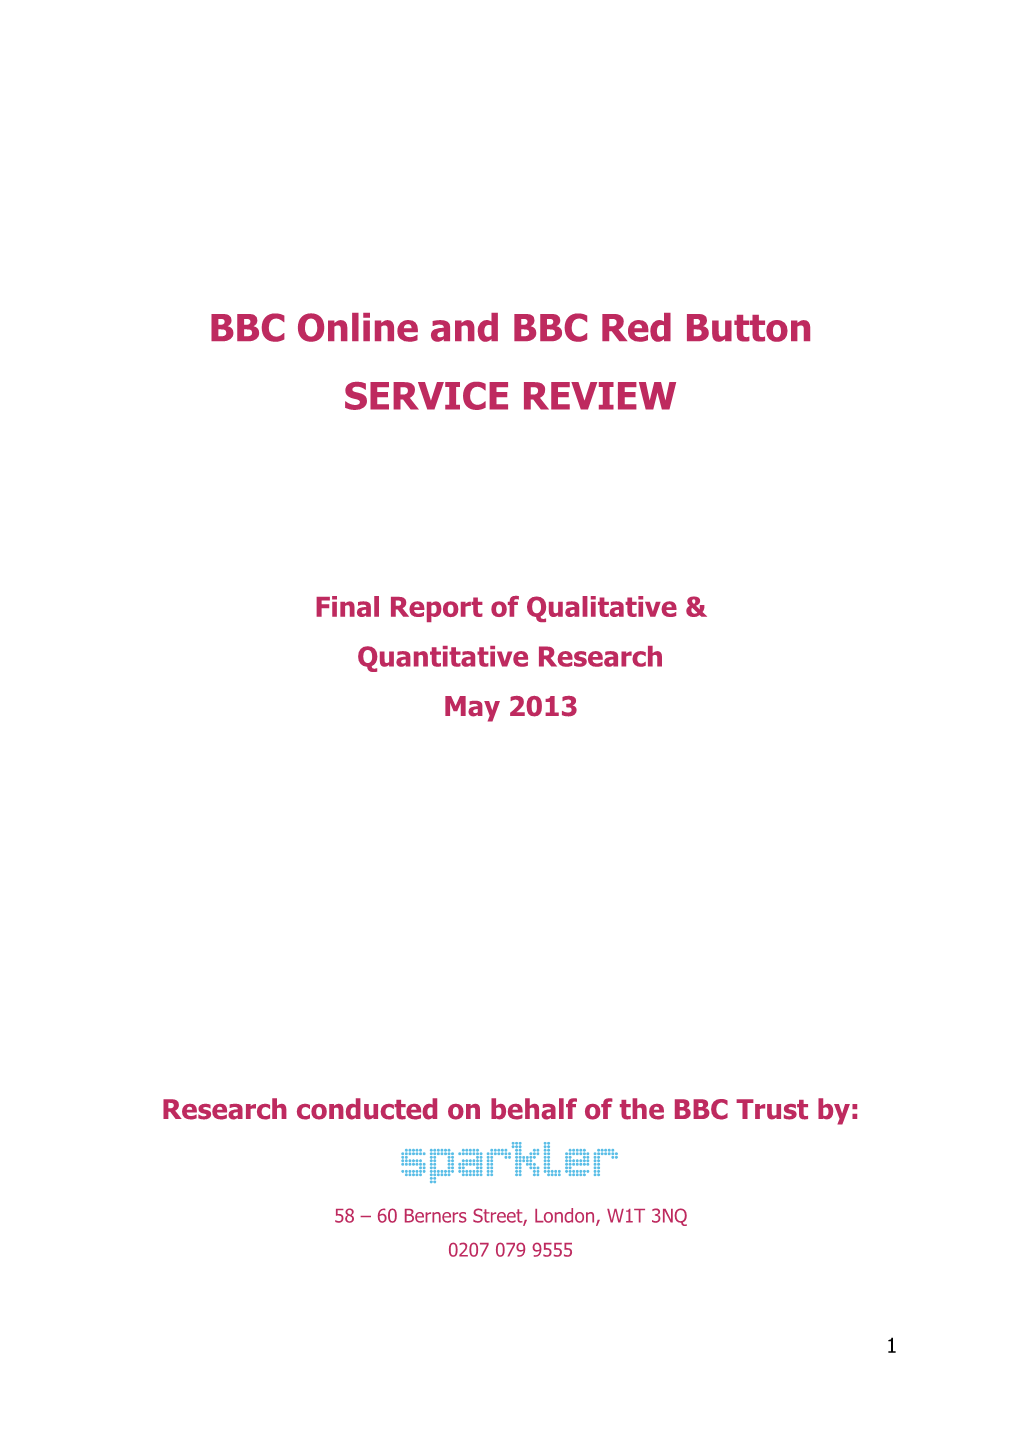 BBC Trust Online and Red Button SERVICE REVIEW